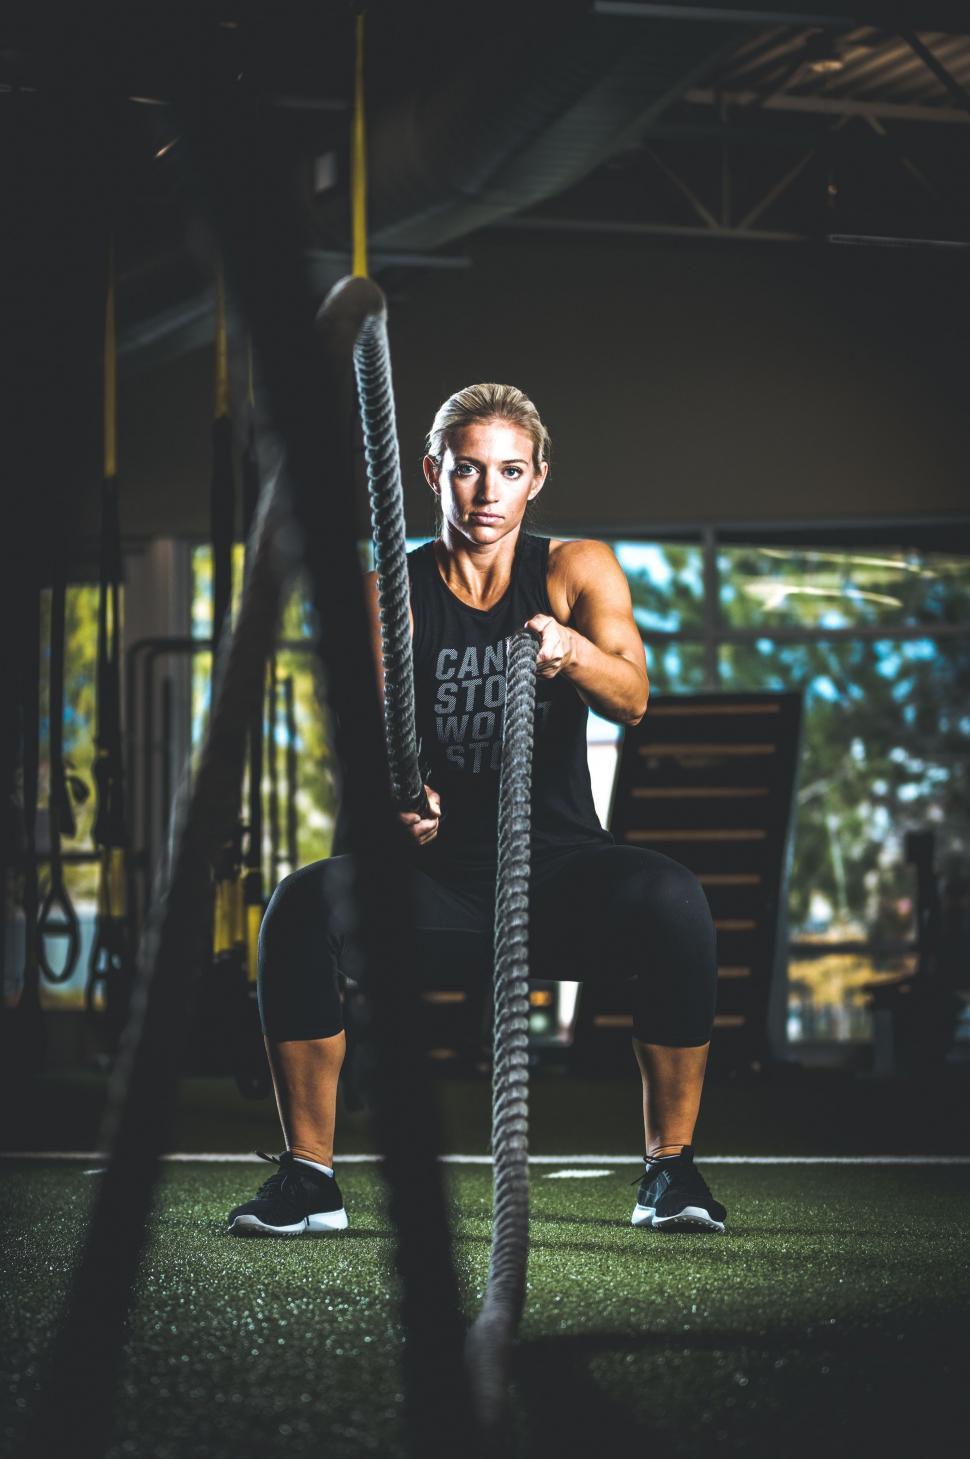 Free Image of Woman with rope in gym  